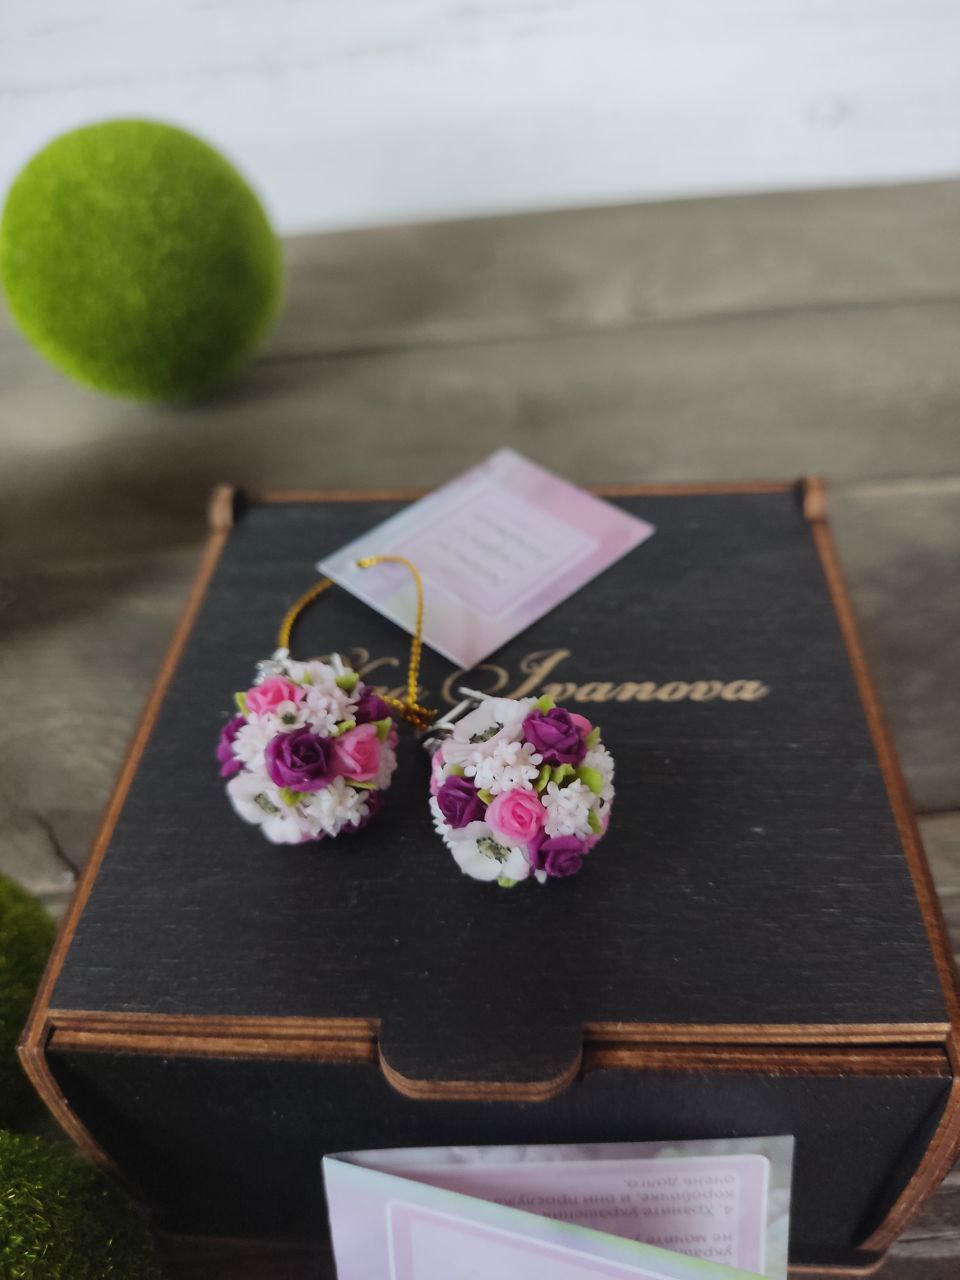 * Silver earrings with flowers